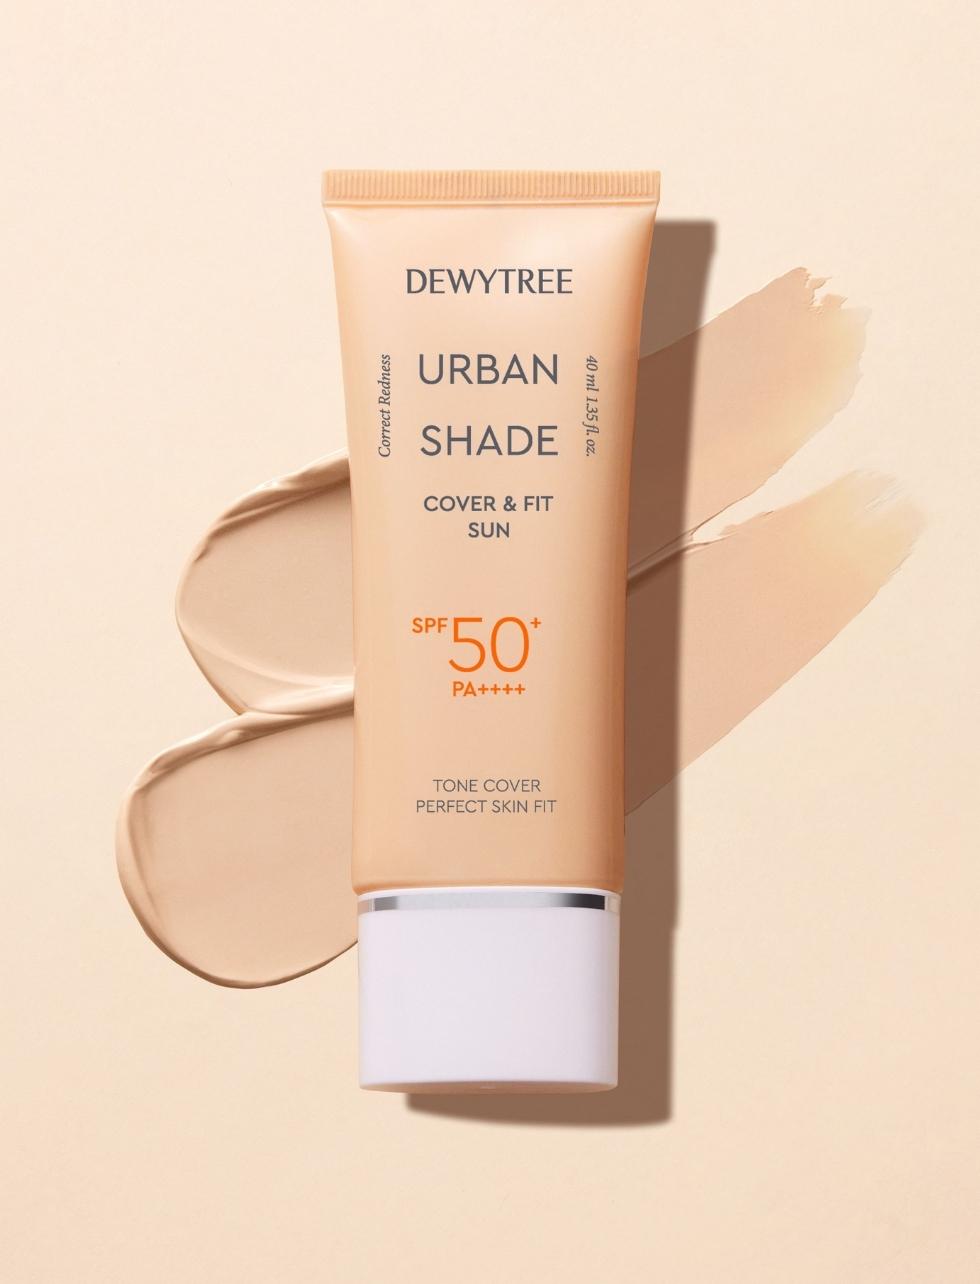 Dewytree Urban Shade Cover And Fit Sun SPF50+